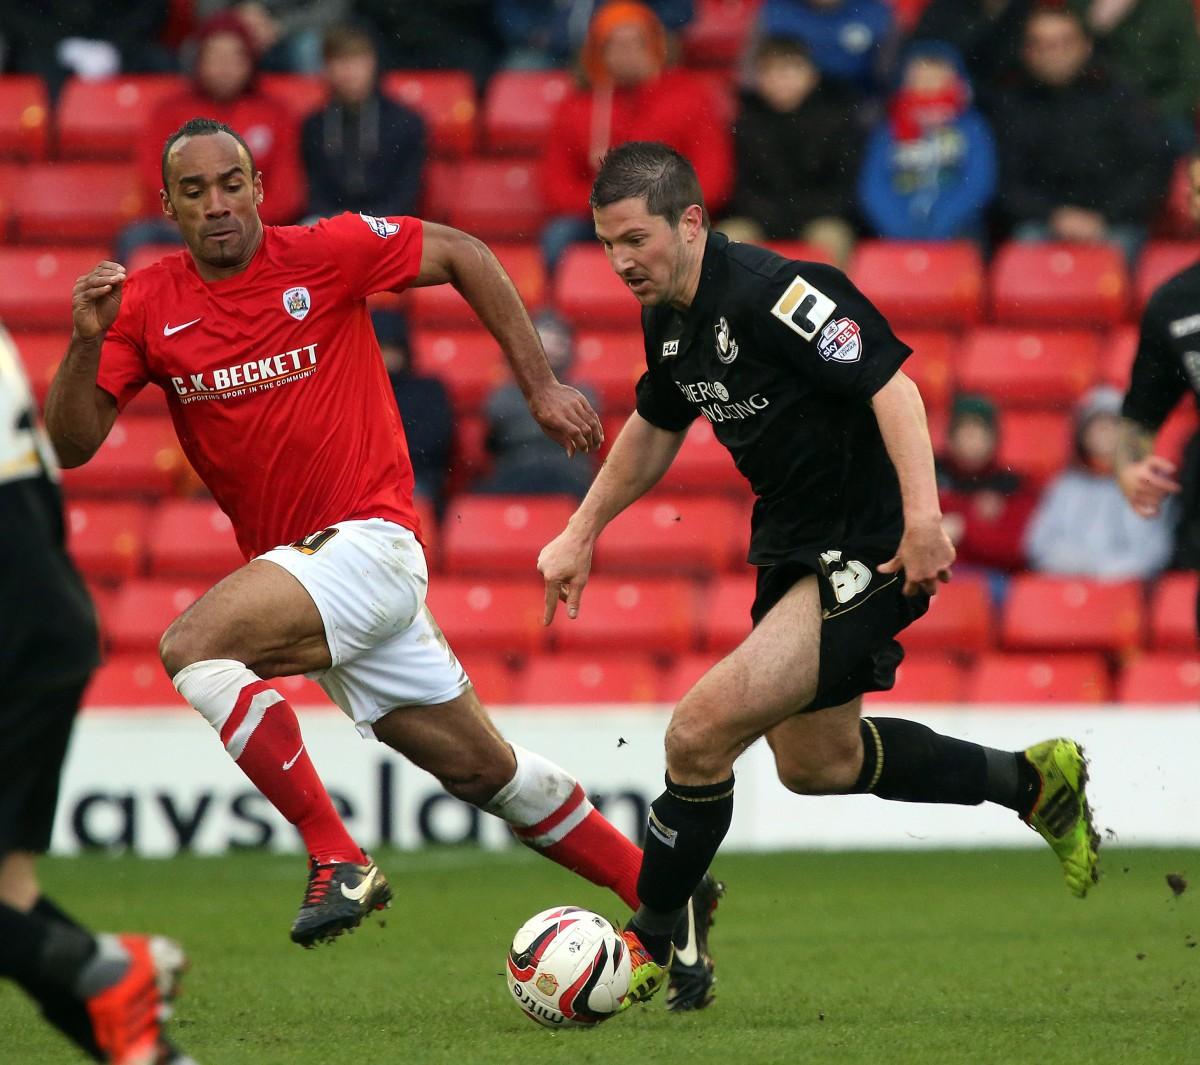 Barnsley v AFC Bournemouth at the Oakwell stadium on Saturday, March 22, 2014.